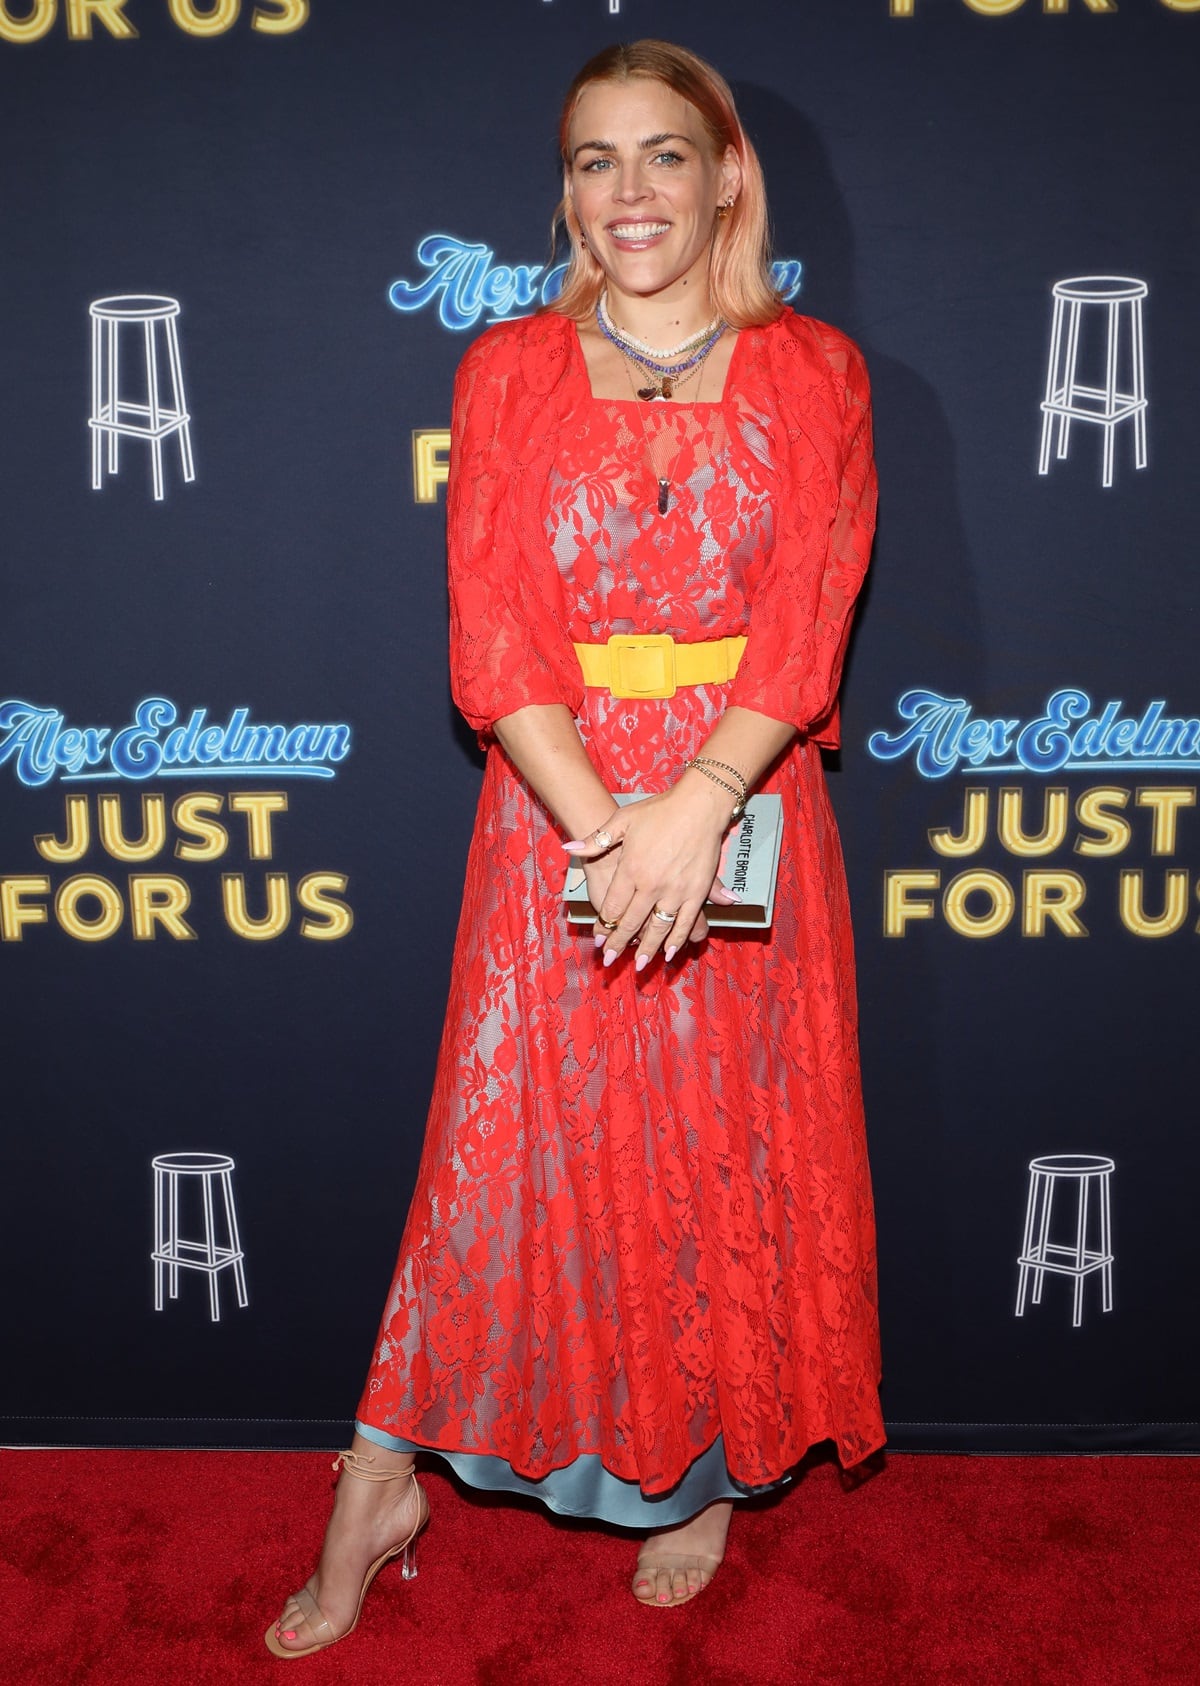 Busy Philipps looked lovely in a red dress paired with ankle-strap sandals at the "Just For Us" Broadway Opening Night